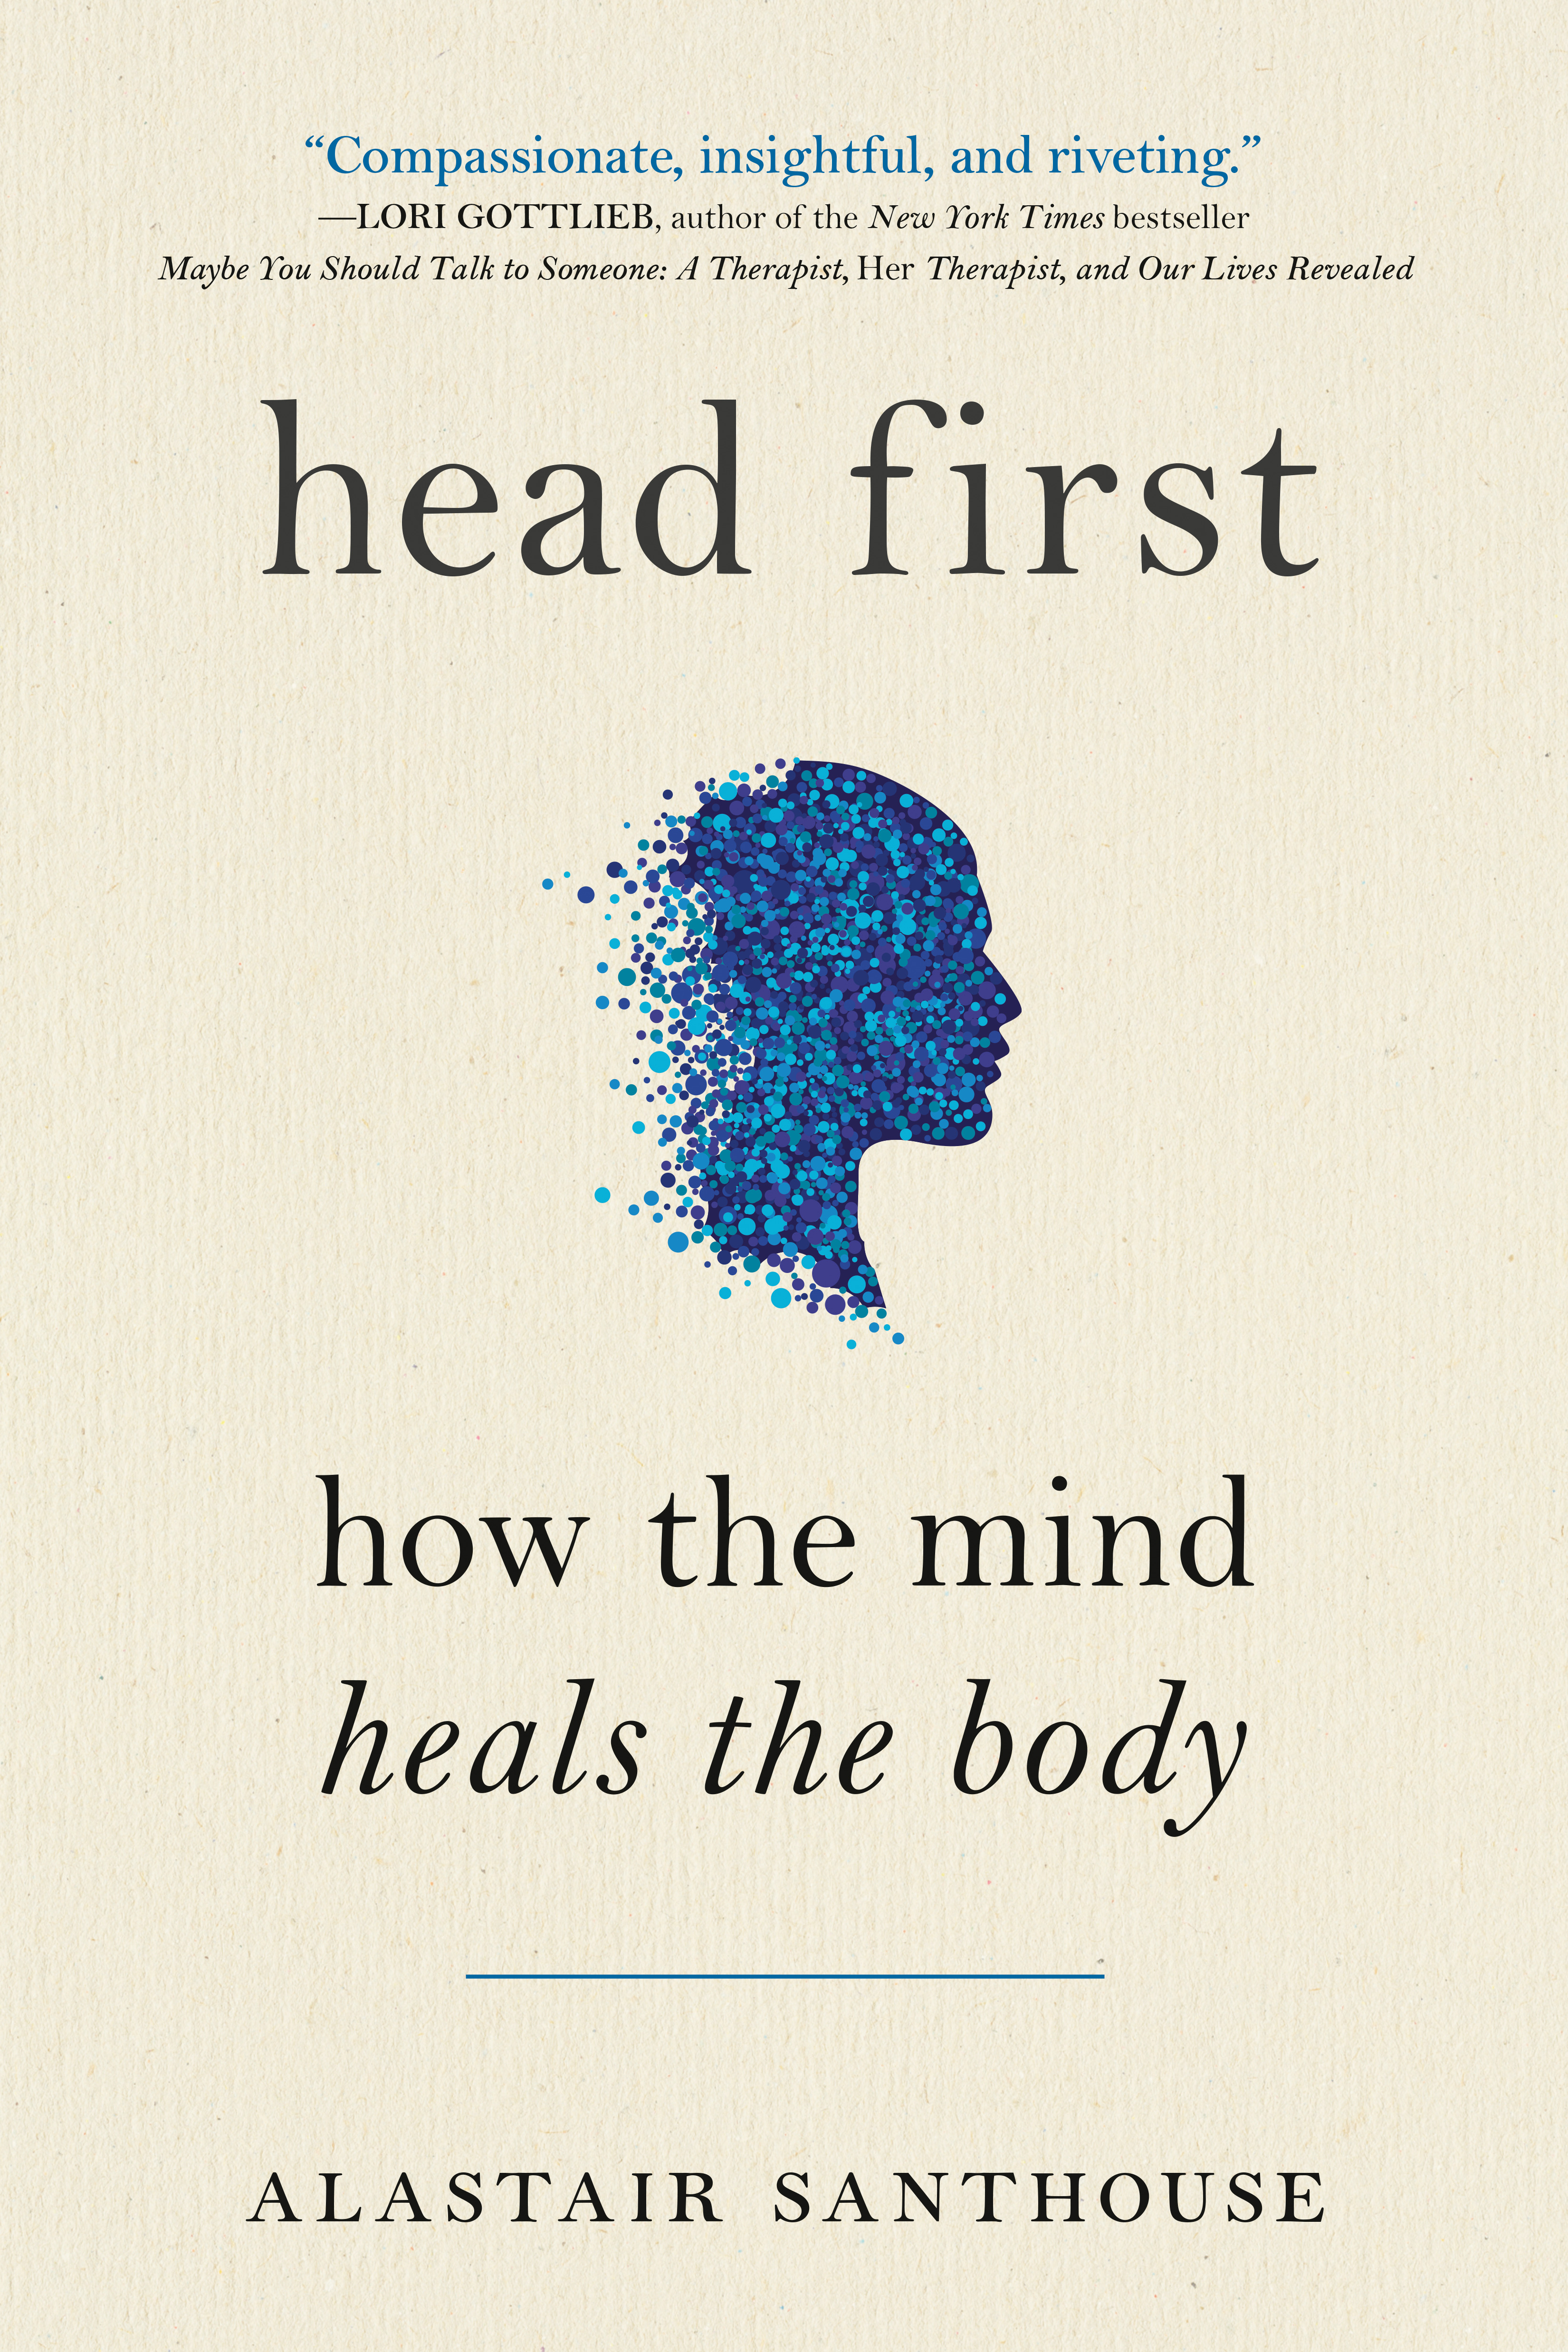 Head First : How The Mind Heals The Body | Psychology & Self-Improvement